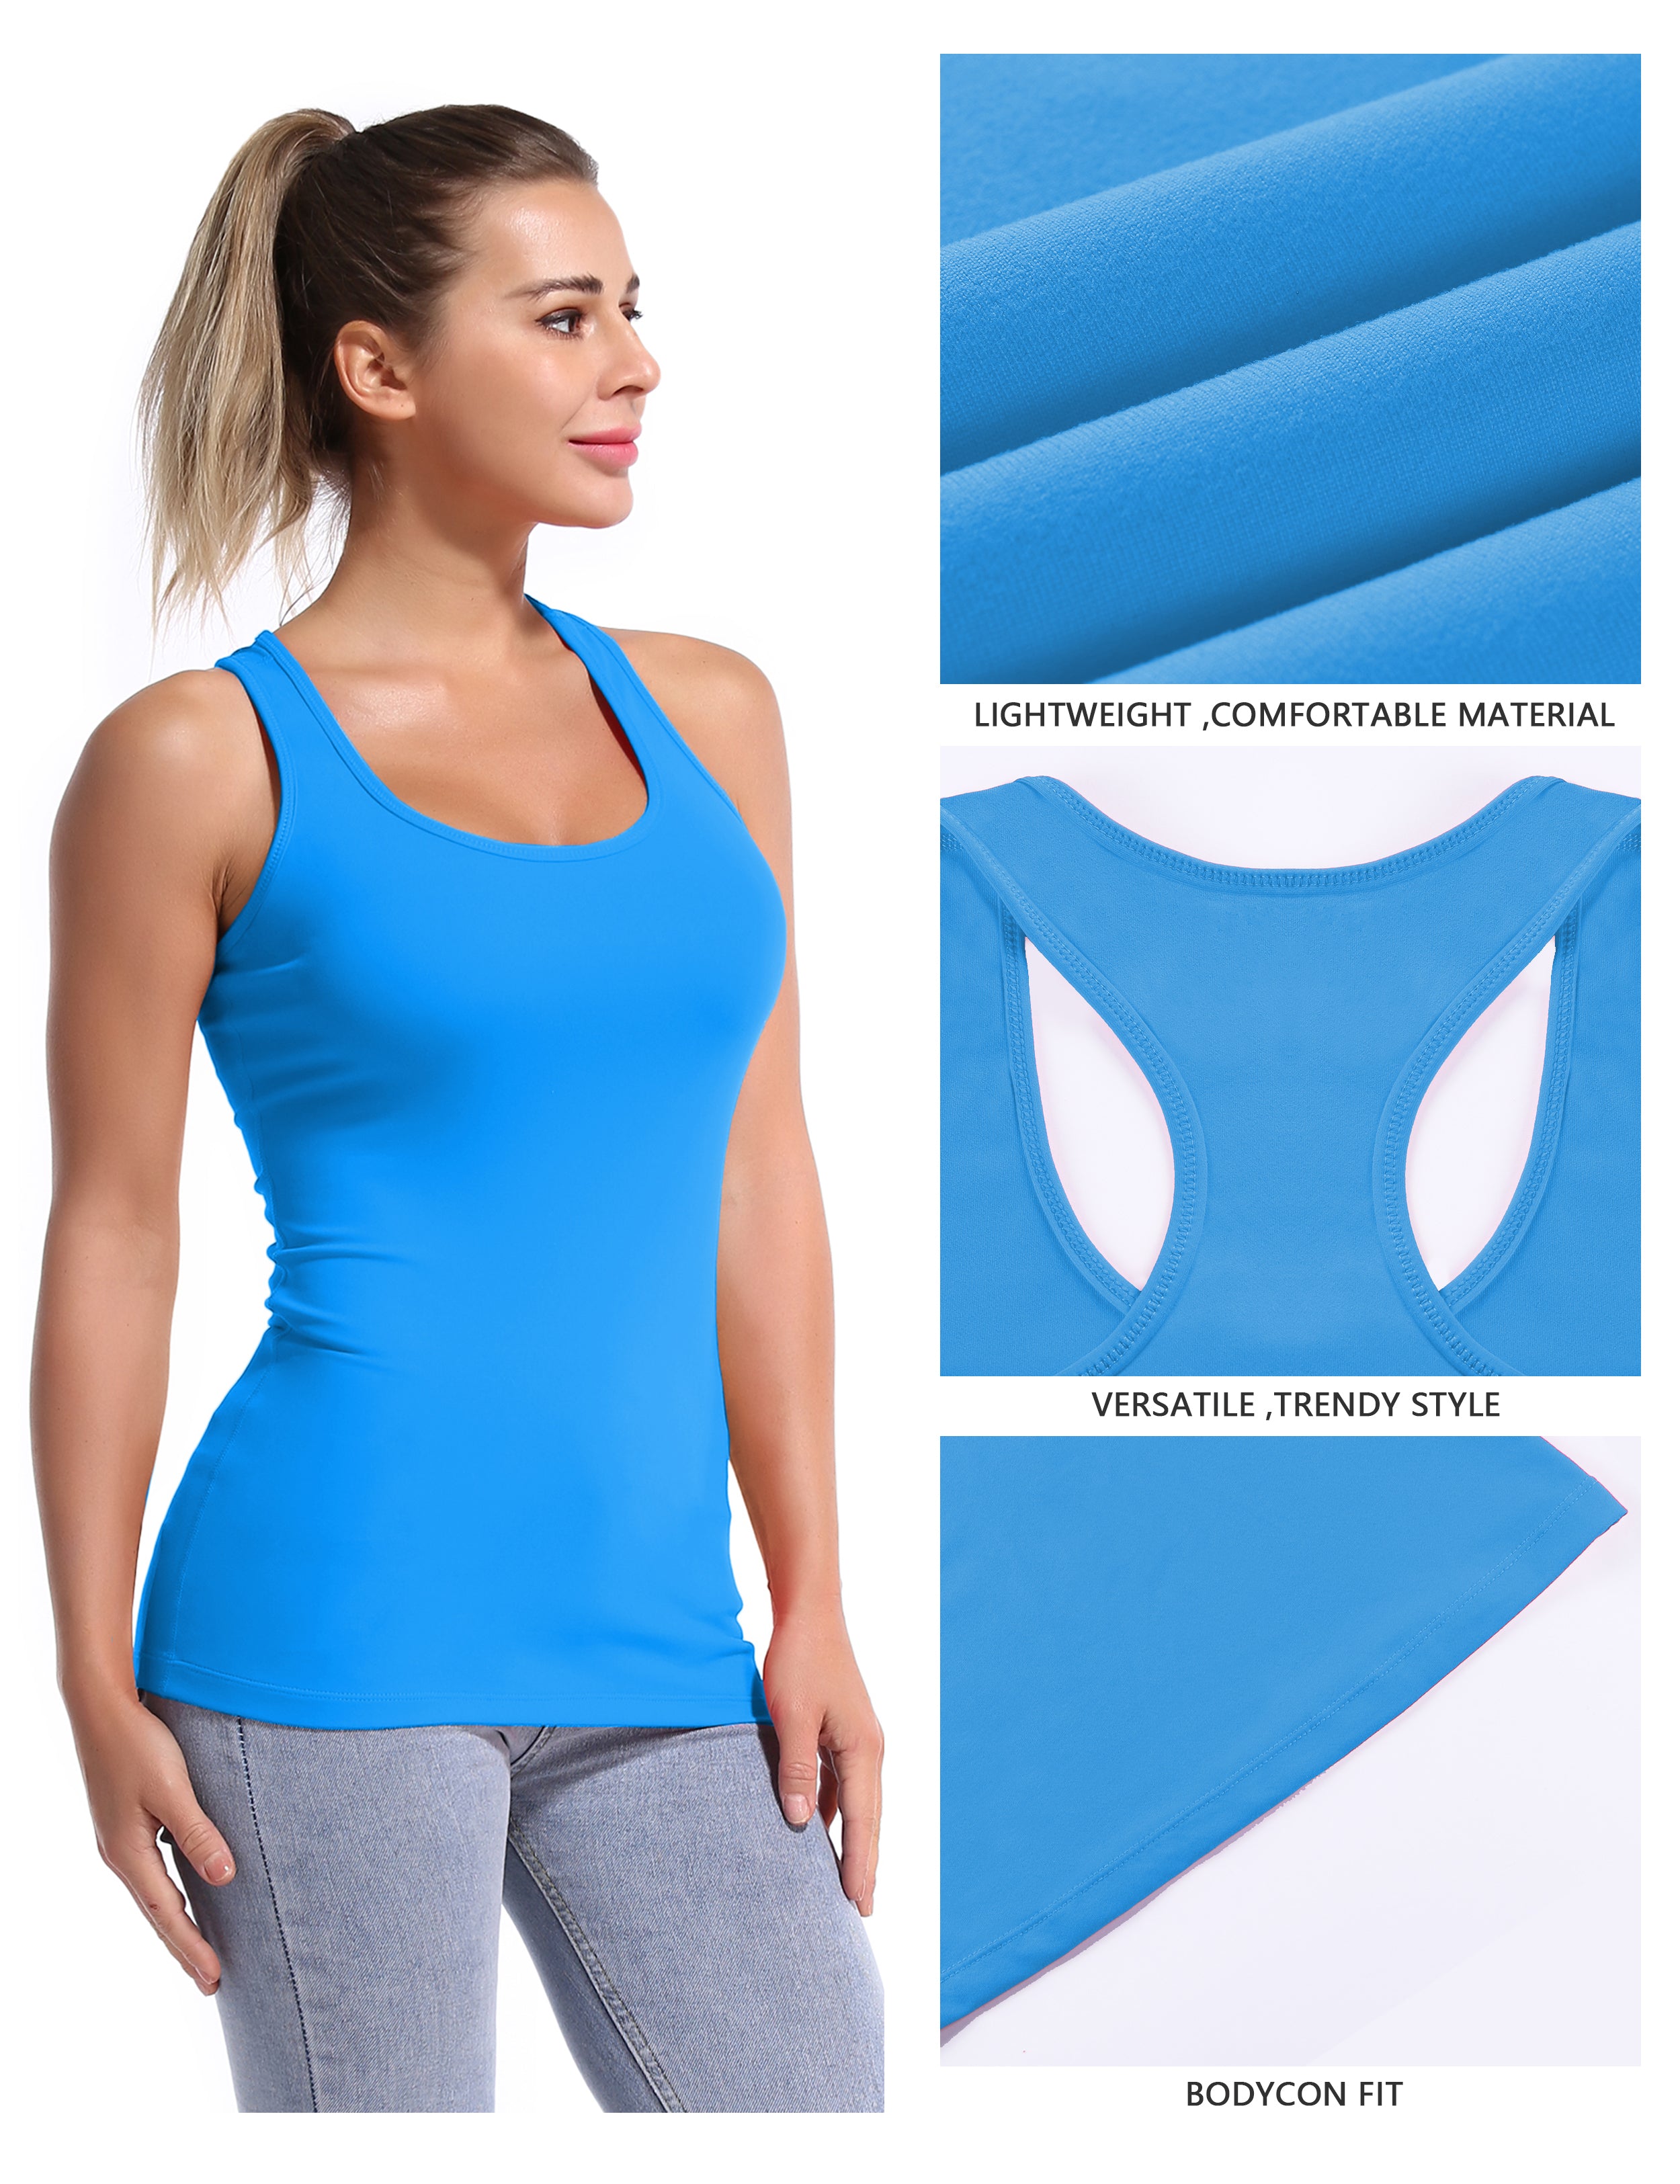 Racerback Athletic Tank Tops electricblue 92%Nylon/8%Spandex(Cotton Soft) Designed for Pilates Tight Fit So buttery soft, it feels weightless Sweat-wicking Four-way stretch Breathable Contours your body Sits below the waistband for moderate, everyday coverage